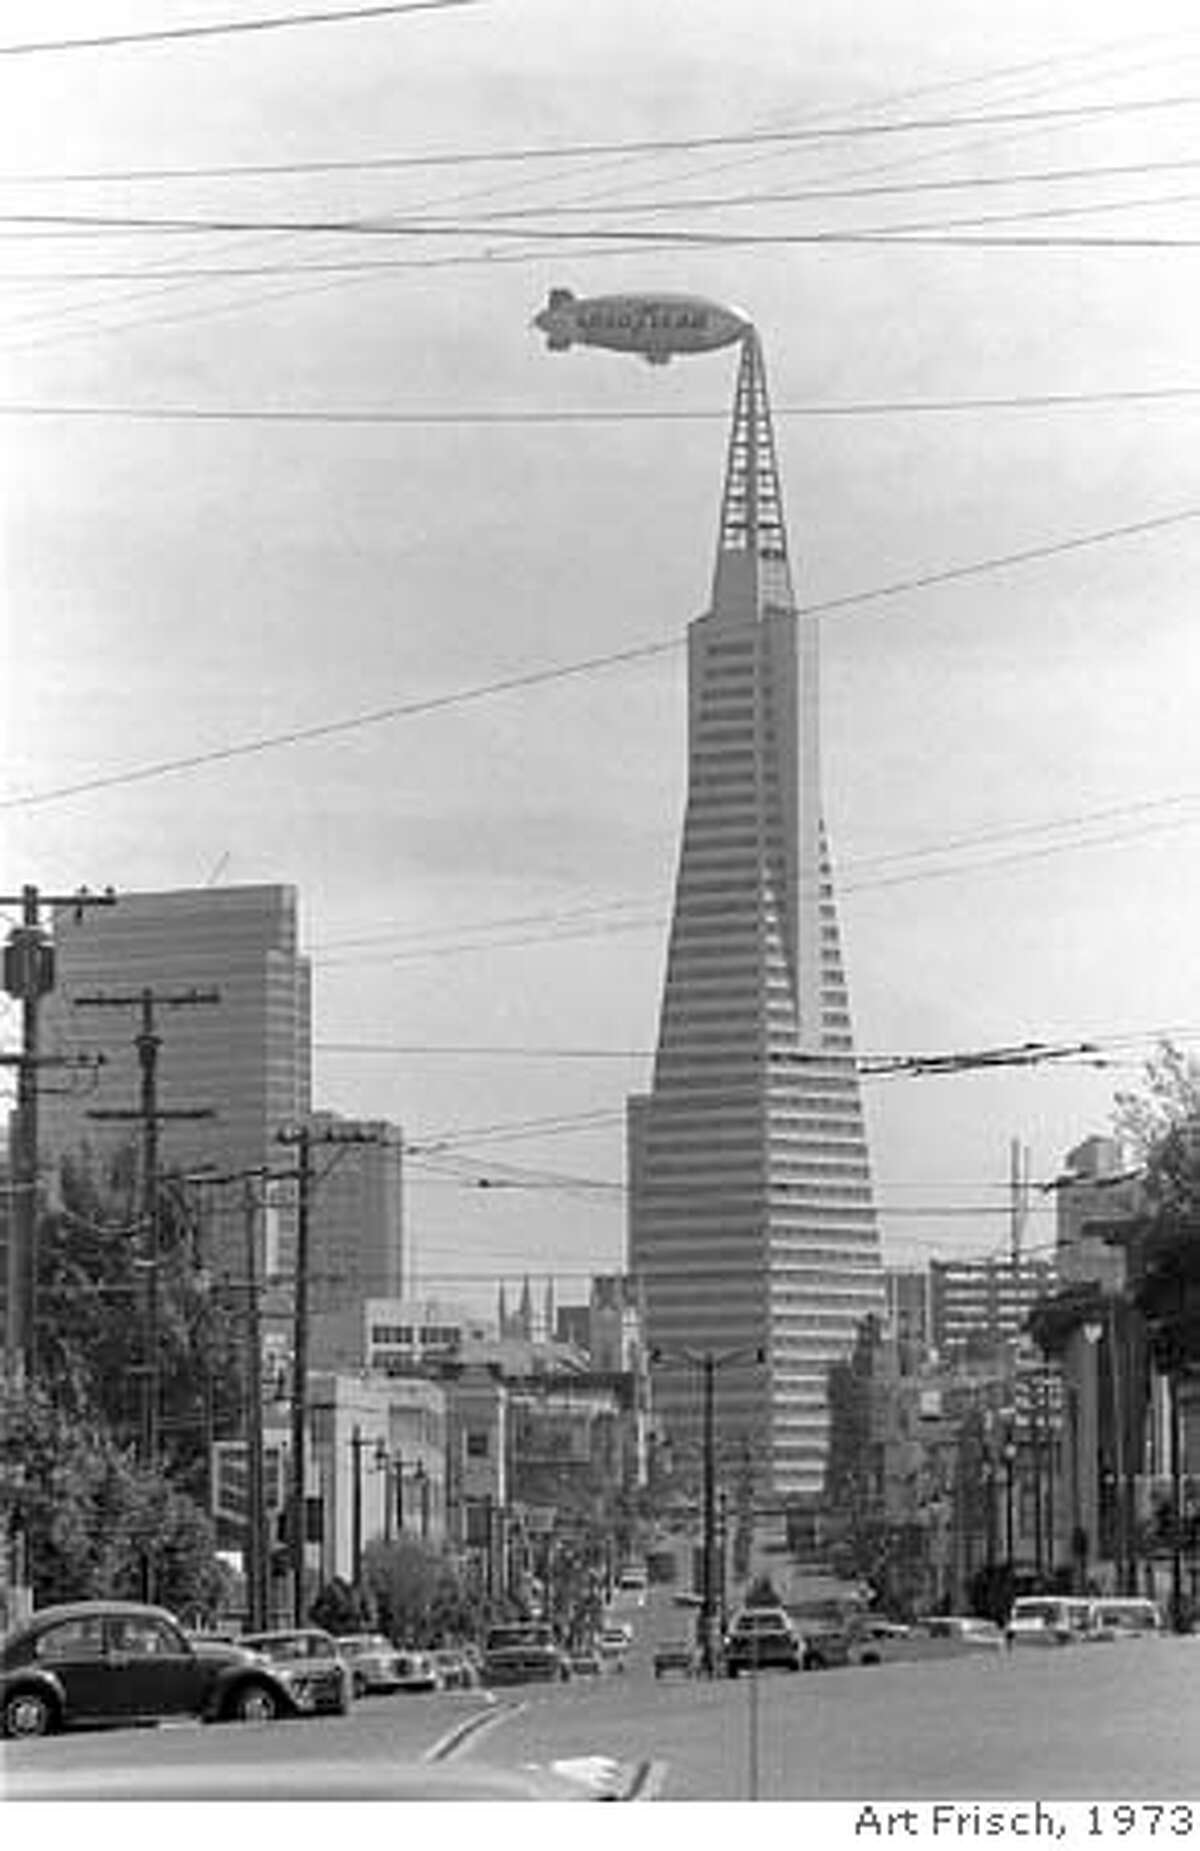 GOODYEAR/22SEP73/MN/AF - The Goodyear blimp passing by the nearly completed Transamerican Pyramid. Photo by Art Frisch Sept. 22 1973